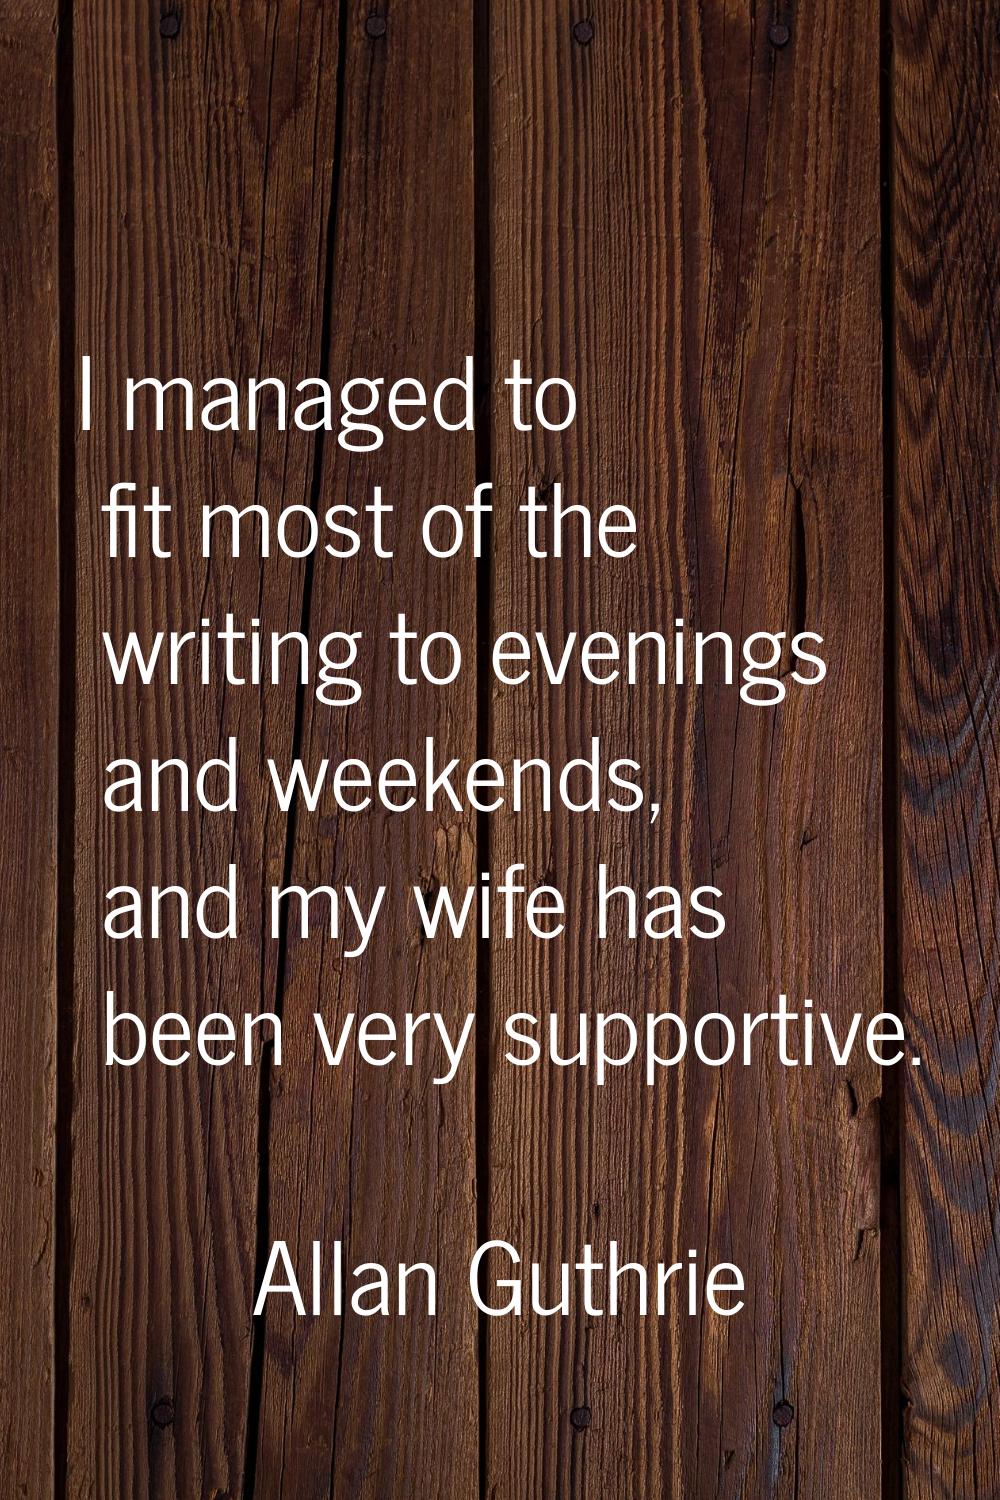 I managed to fit most of the writing to evenings and weekends, and my wife has been very supportive